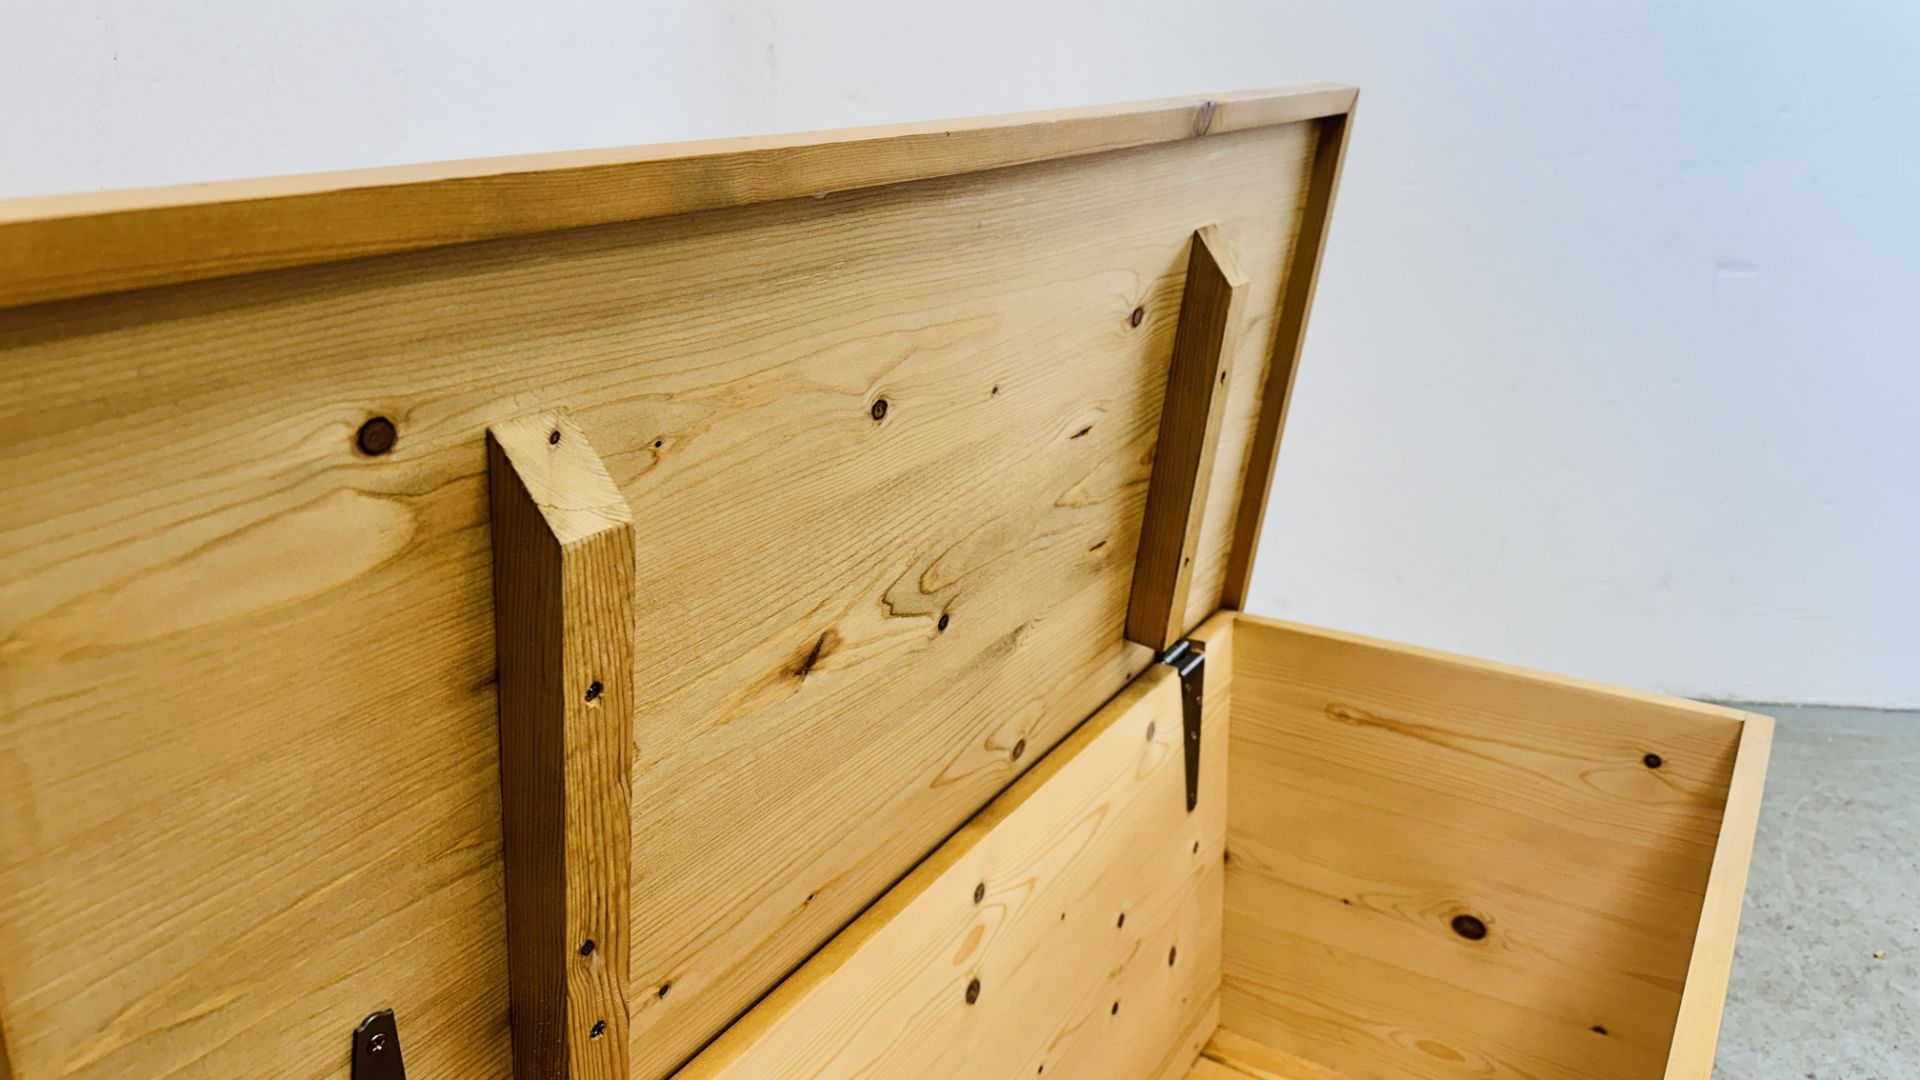 MODERN WAXED PINE HINGED TOP BLANKET / TOY BOX - W 96CM X D 44CM X H 50CM. - Image 7 of 7